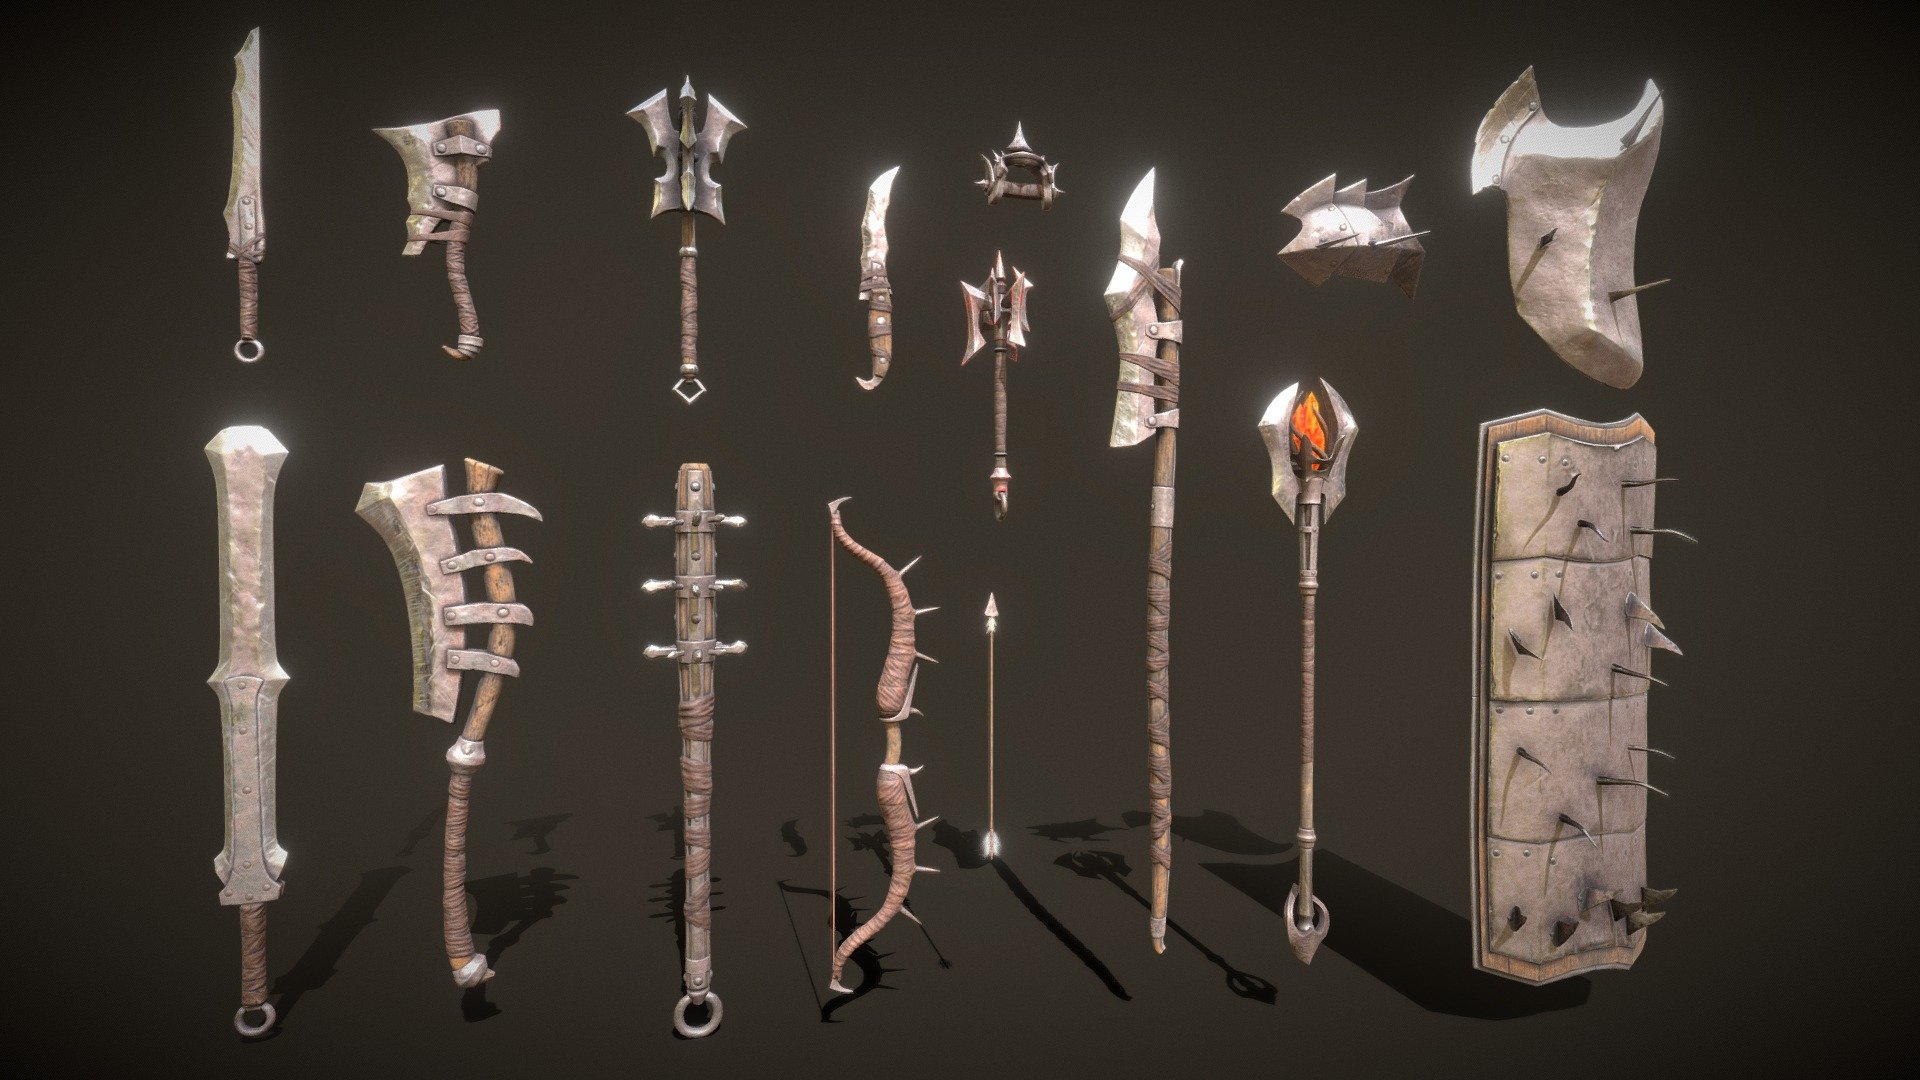 A set of fantasy Orc weapons.

The set consists of sixteen unique objects.

PBR textures have a resolution of 2048x2048.

Total polygons: 44641 triangles; 22913 vertices.

1) Sword (one-handed) - 1372 tris

2) Sword (two-handed) - 1432 tris

3) Mace (one-handed) - 2520 tris

4) Mace (two-handed) - 6028 tris

5) Ax (one-handed) - 1832 tris

6) Ax (two-handed) - 2054 tris

7) Lance - 3346 tris

8) Dagger - 1286 tris

9) Brass knuckles - 1760 tris

10) Bow - 2956 tris

11) Staff - 4606 tris

12) Scepter - 2812 tris

13) Shield (small) - 2309 tris

14) Shield (medium) - 2034 tris

15) Shield (great) - 7774 tris

16) Arrow - 520 tris

Archives with textures contain:

PNG textures for blender - base color, metallic, normal, roughness, opacity, glow

Texturing Unity (Metallic Smoothness) - AlbedoTransparency, MetallicSmoothness, Normal, Emission

Texturing Unreal Engine - BaseColor, Normal, OcclusionRoughnessMetallic, Emissive - Fantasy Orc Weapon Set - 3D model by zilbeerman 3d model